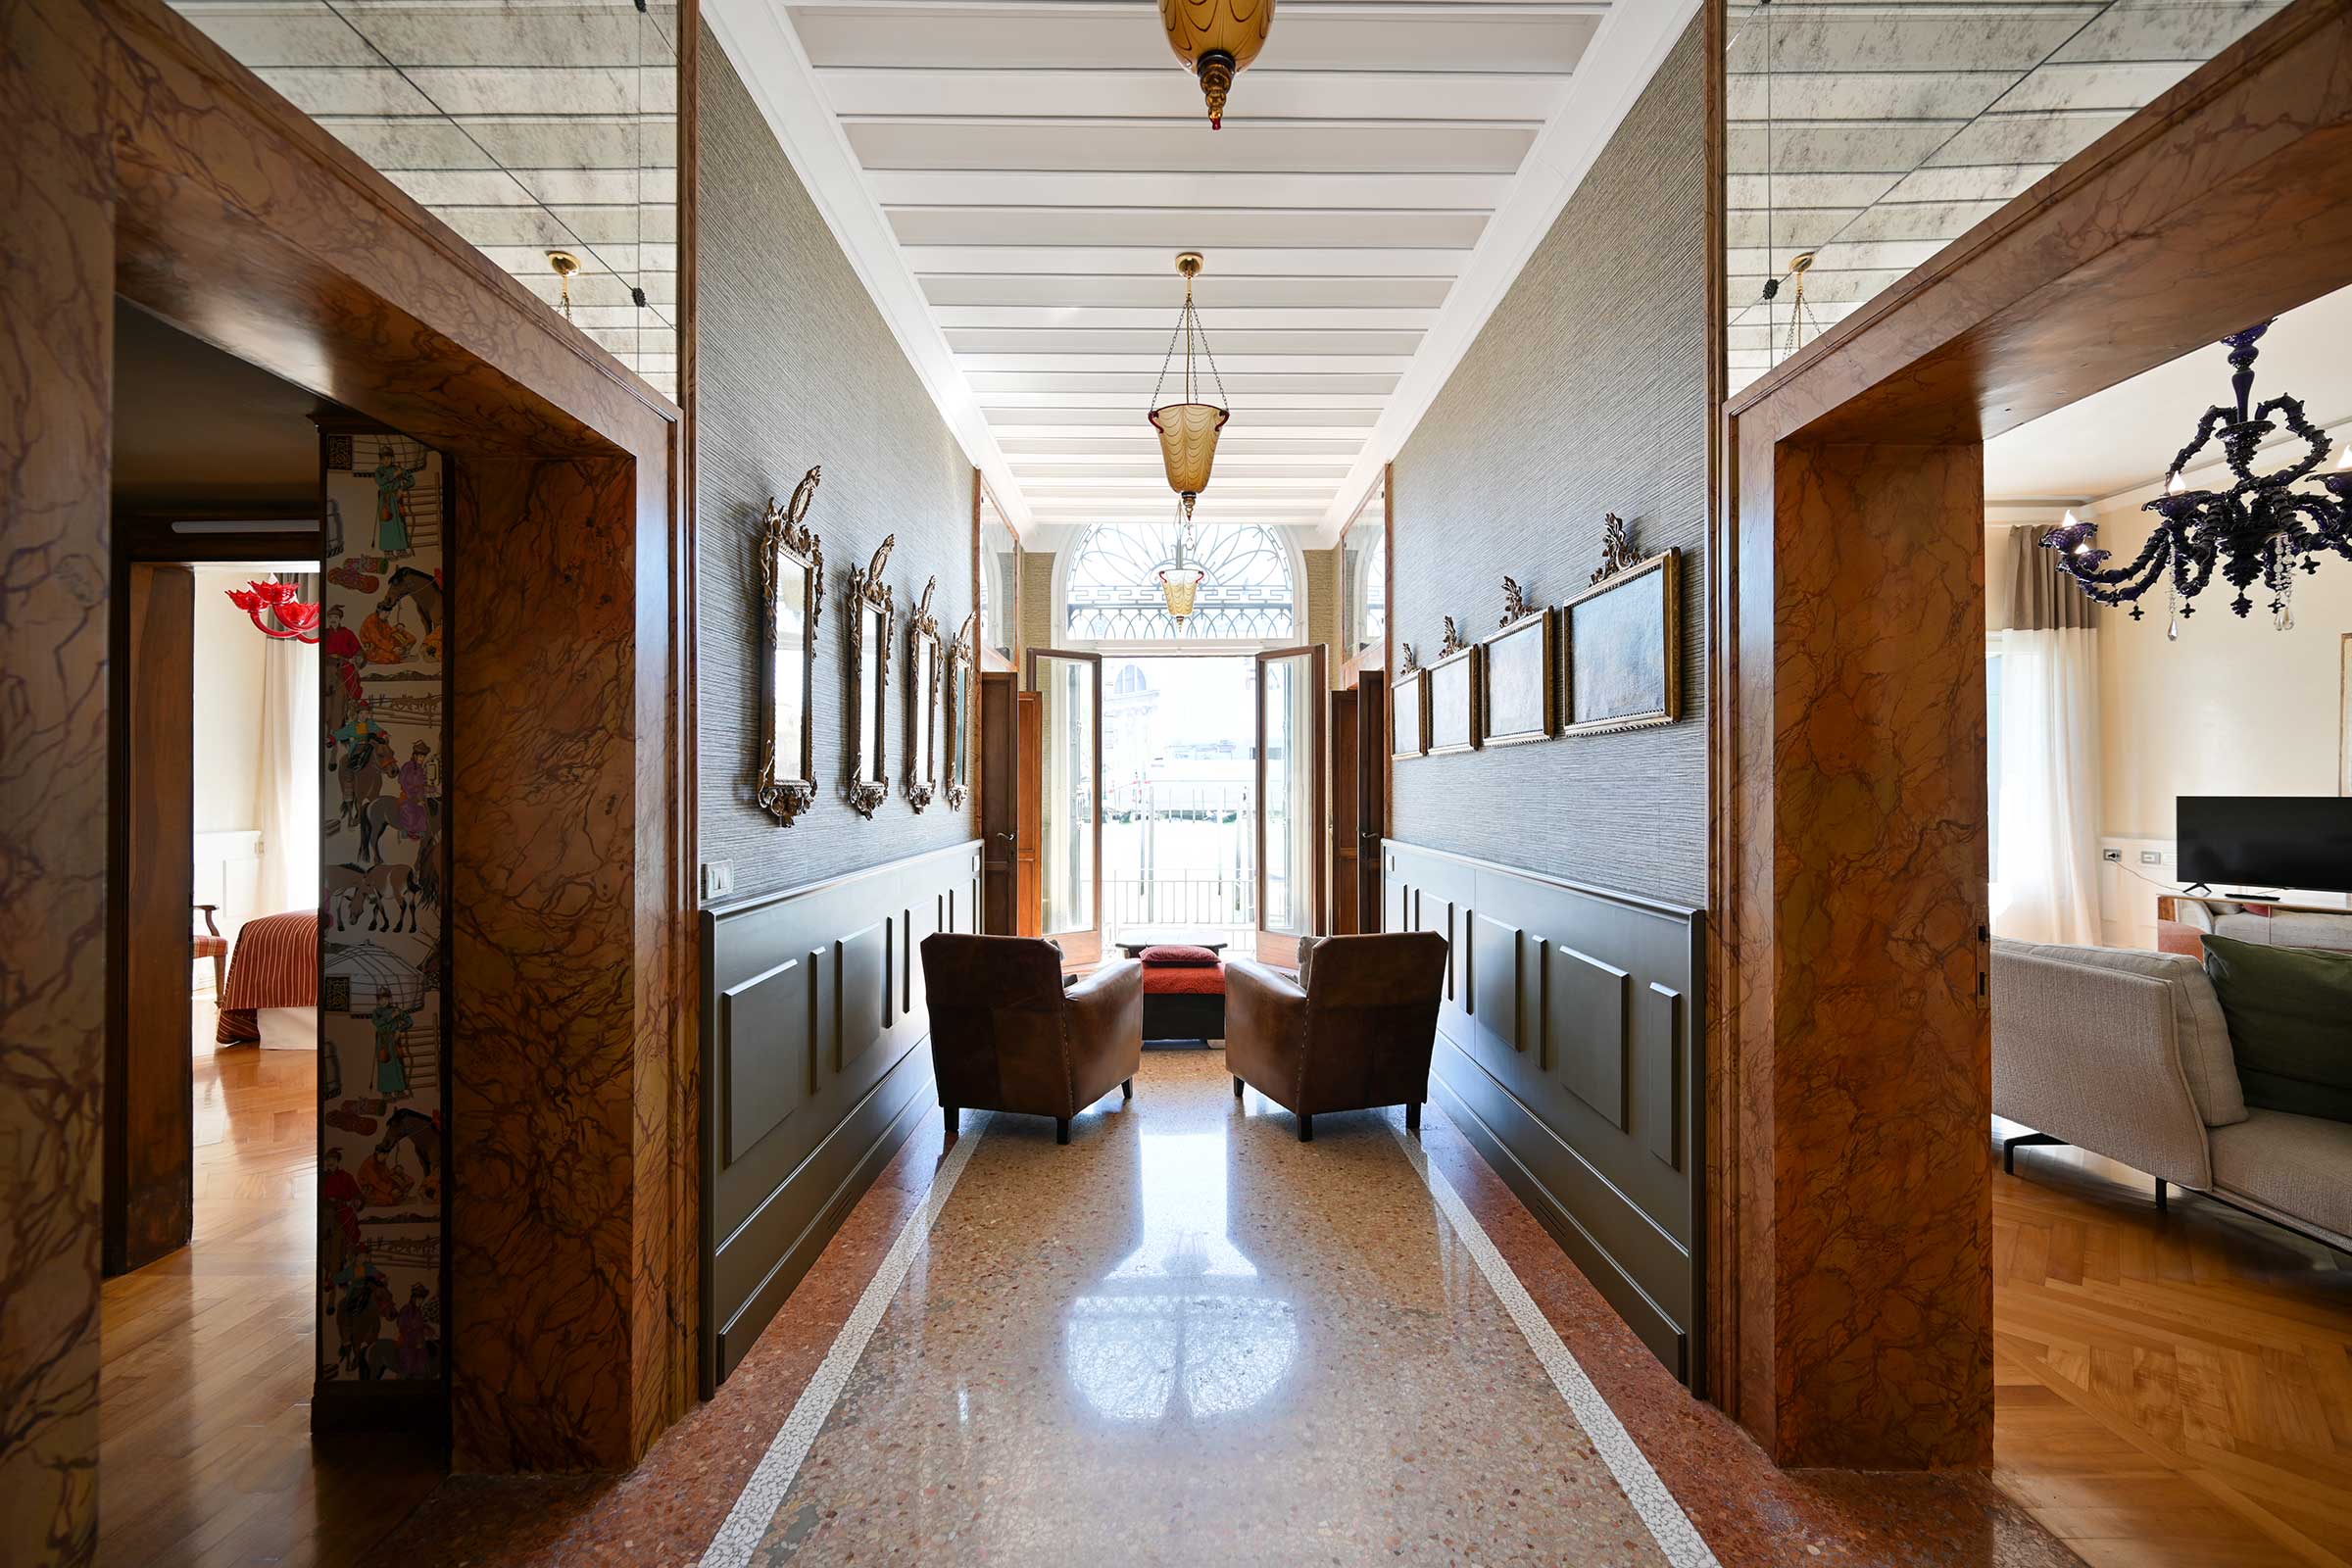 The central hall of the apartment opens on the Grand Canal